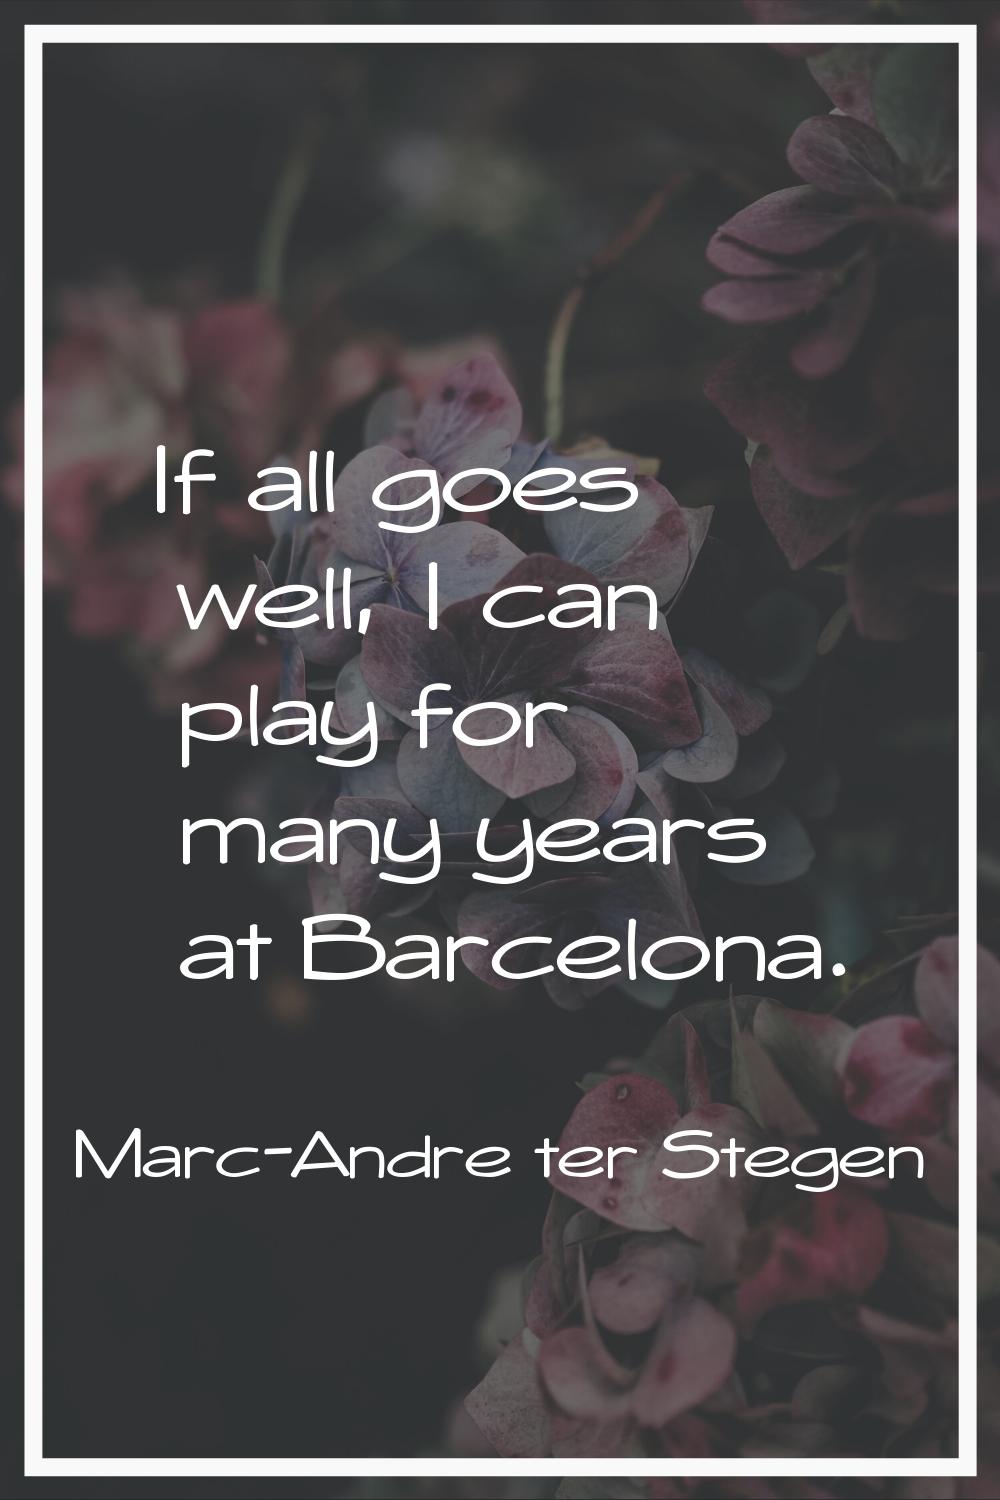 If all goes well, I can play for many years at Barcelona.